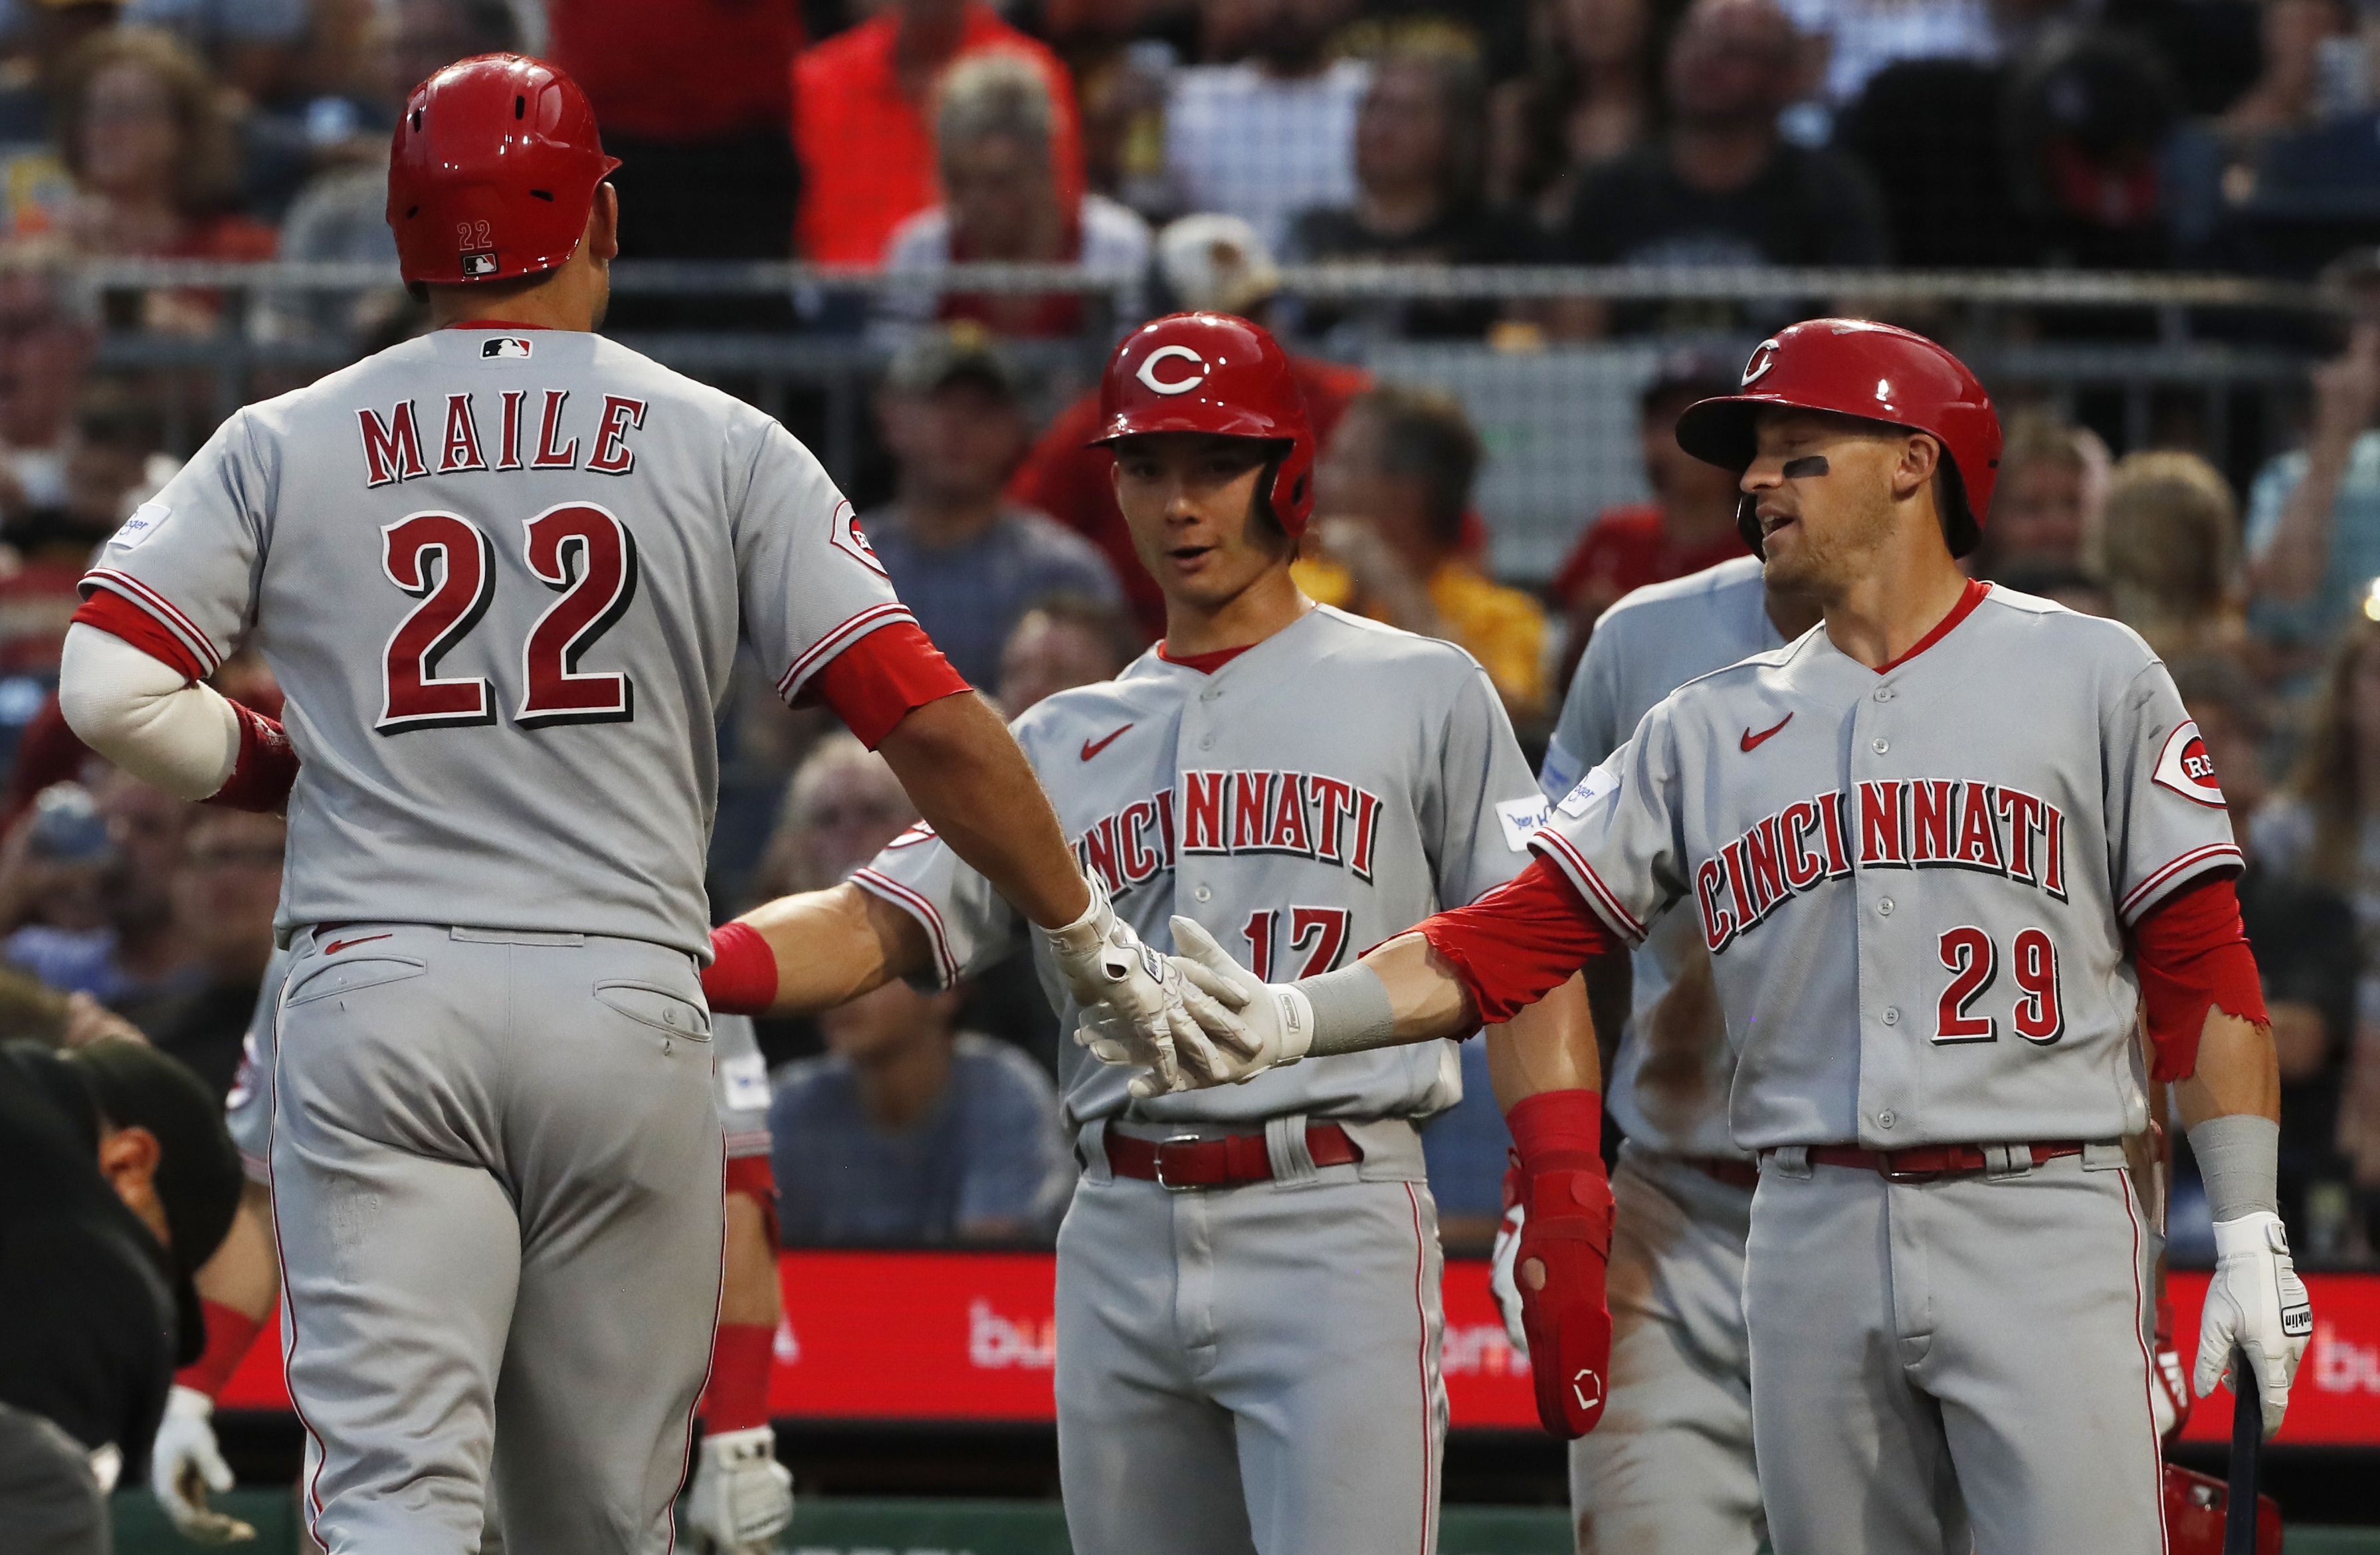 Reds bust out of slump, beat Pirates 9-2